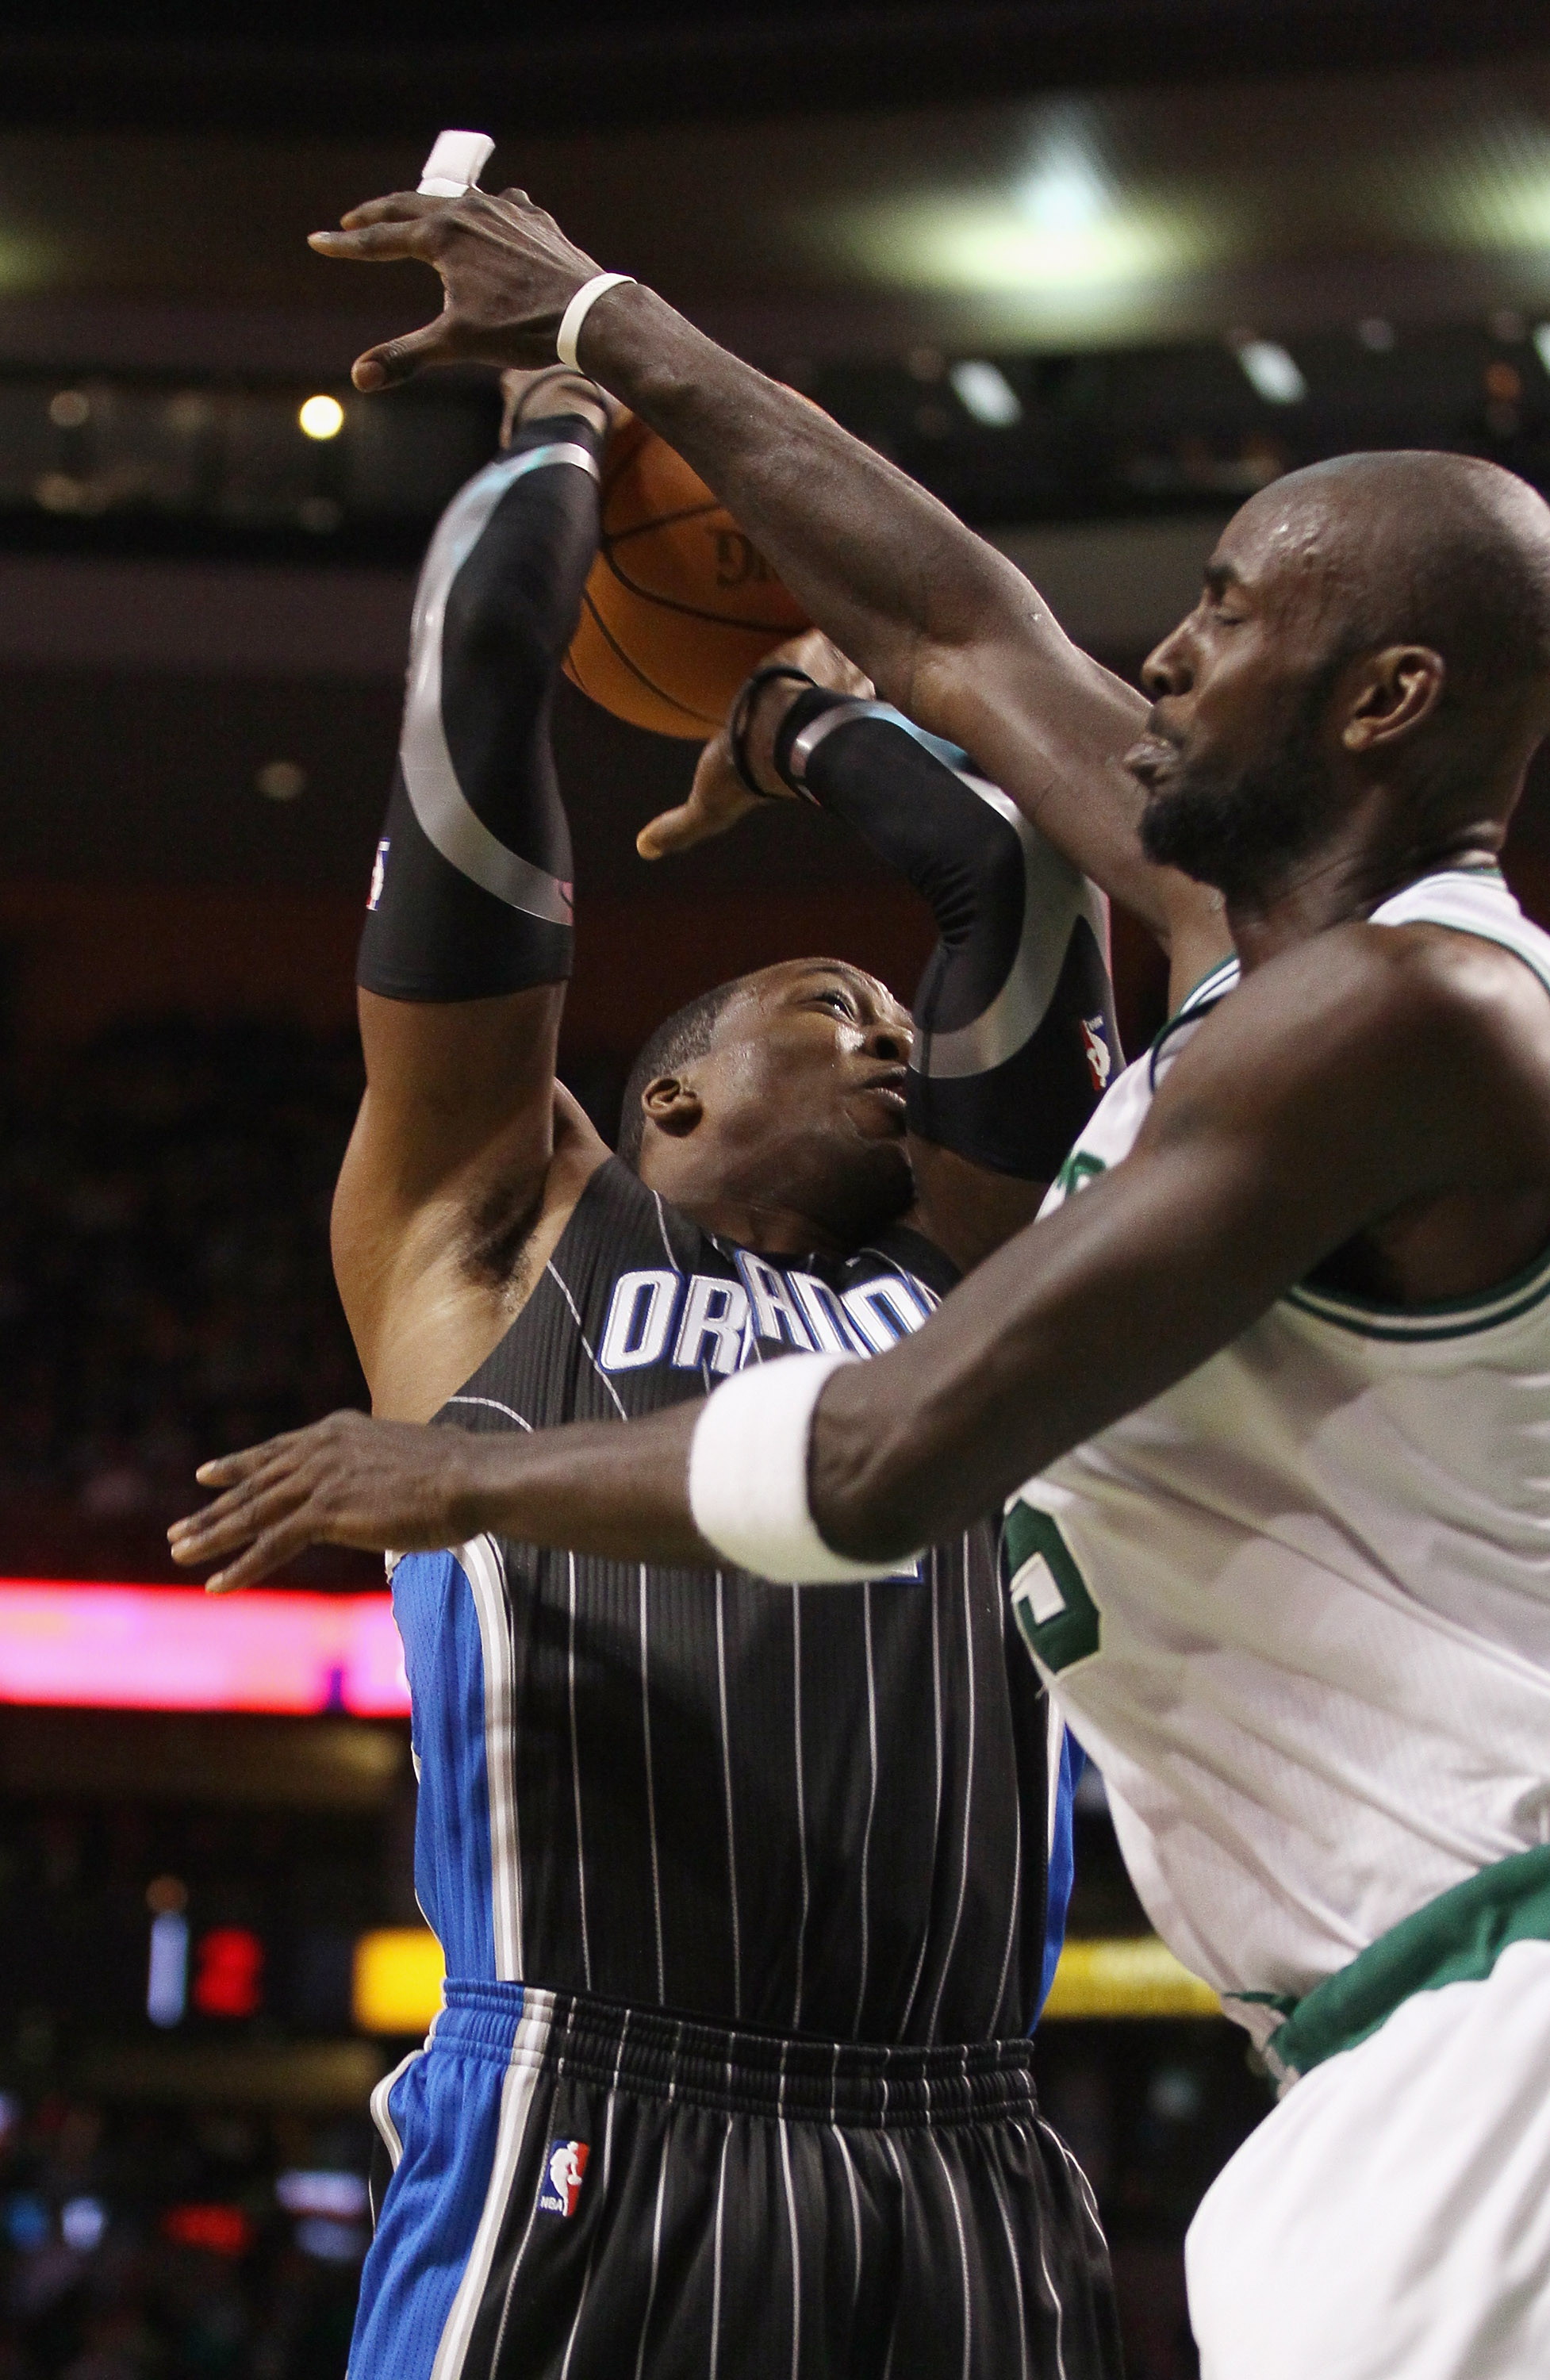 BOSTON, MA - JANUARY 17:  Dwight Howard #12 of the Orlando Magic is fouled by Kevin Garnett #5 of the Boston Celtics  on January 17, 2011 at the TD Garden in Boston, Massachusetts. The Celtics defeated the Magic 109-106.  NOTE TO USER: User expressly ackn